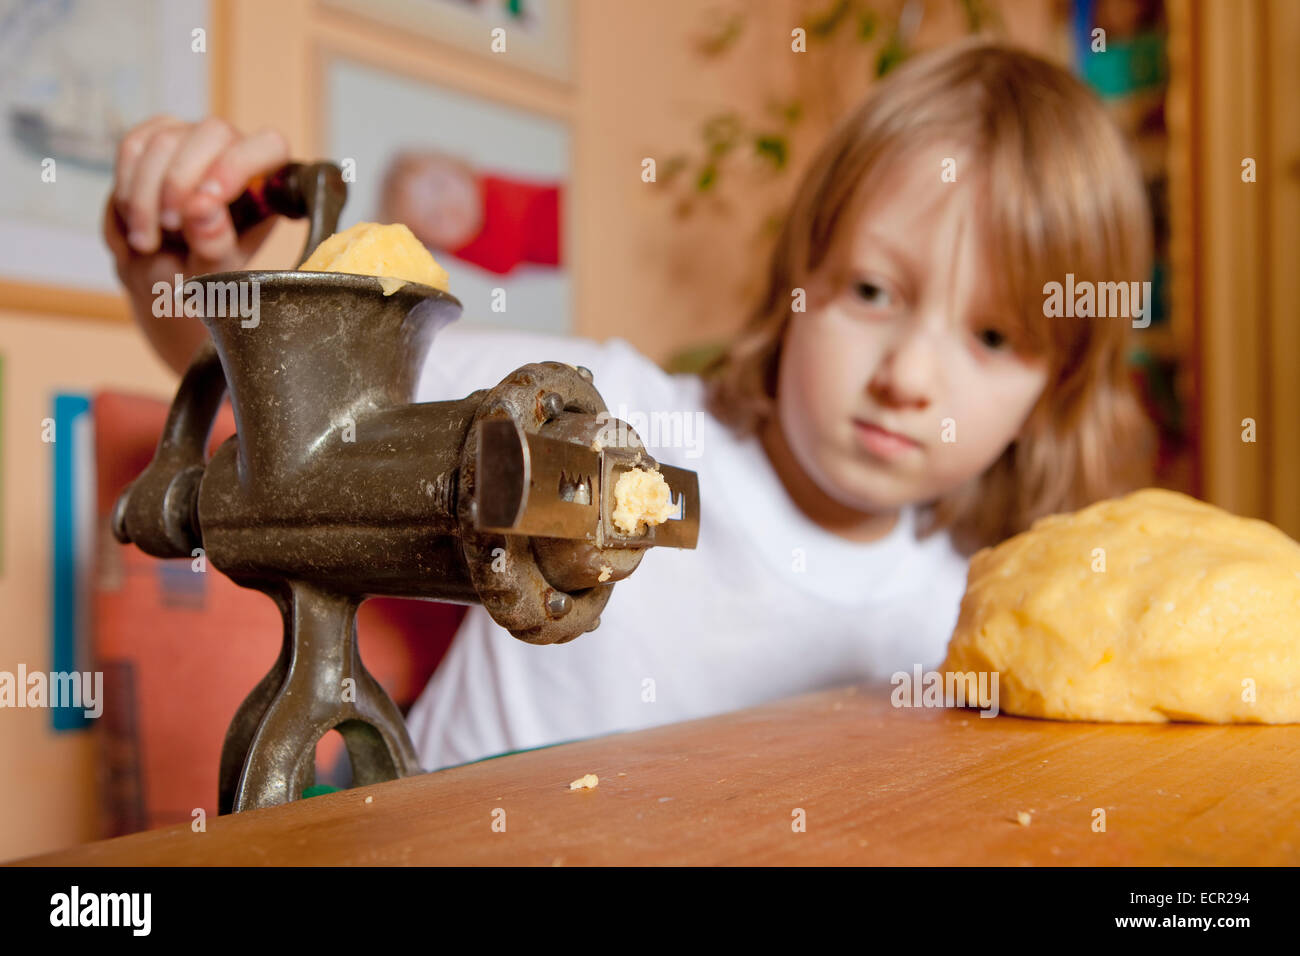 Boy Grinding Dough in the Kitchen Stock Photo